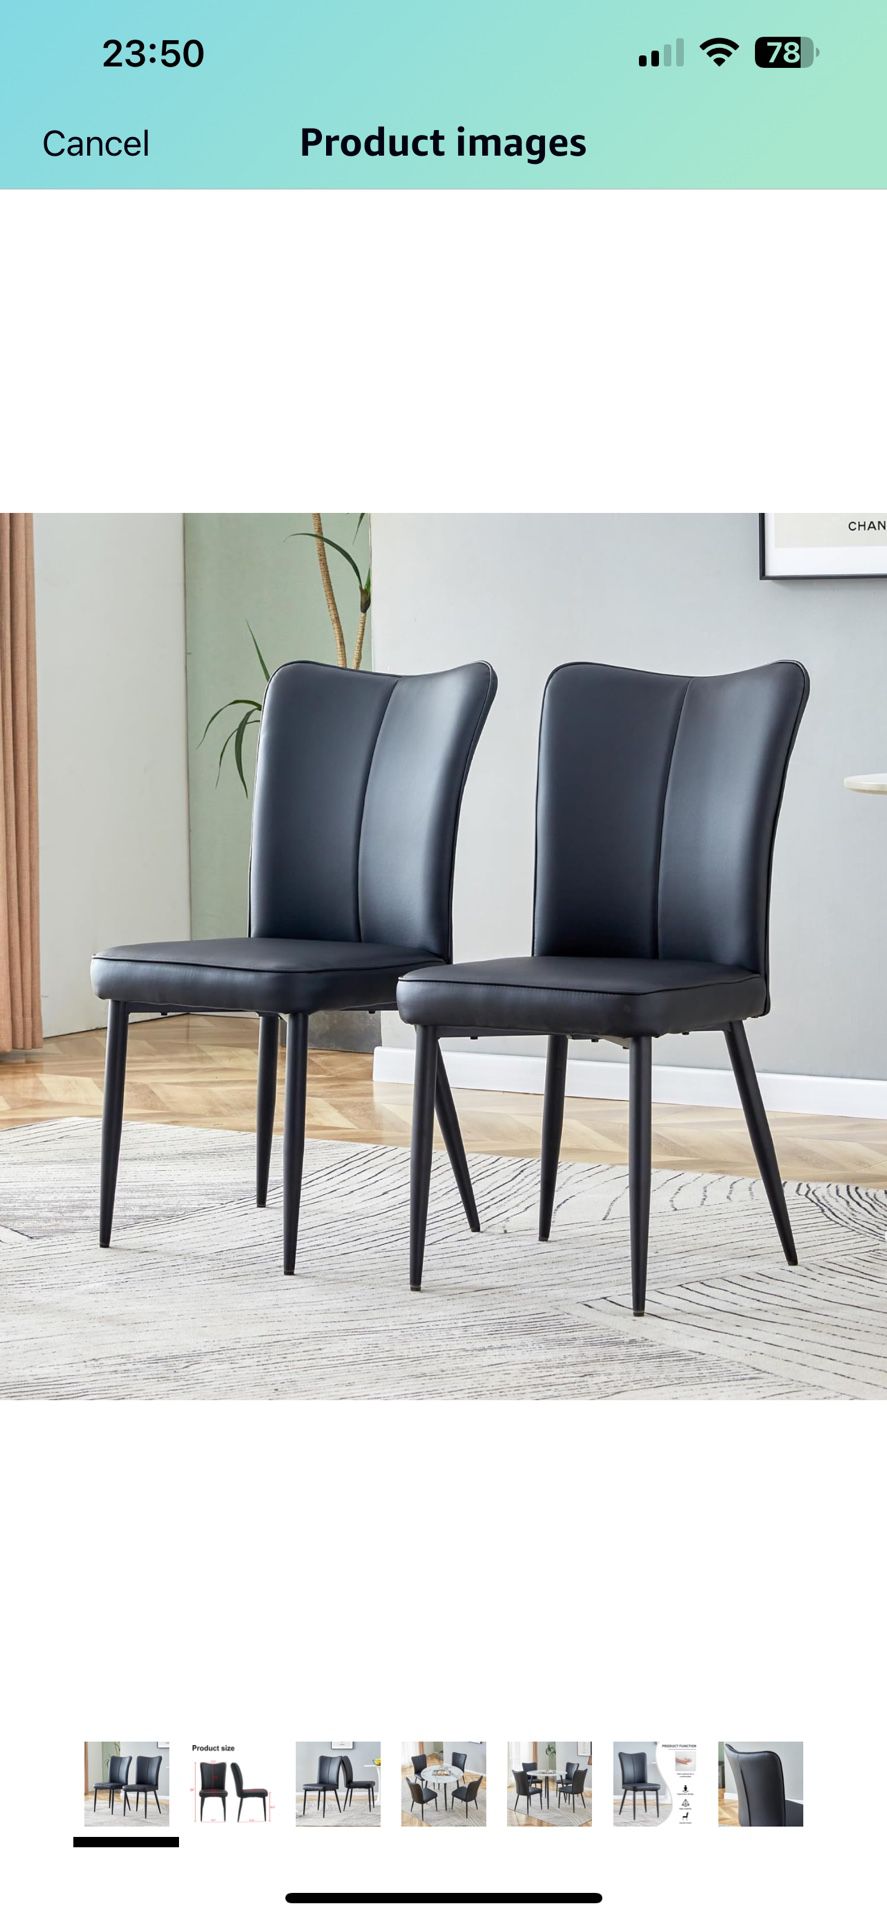 Modern Dining Room Chairs Set of 2, Mid Back Kitchen Side Armless Chair with PU Faux Leather and Black Metal Legs for Kitchen Dining Room Living Room